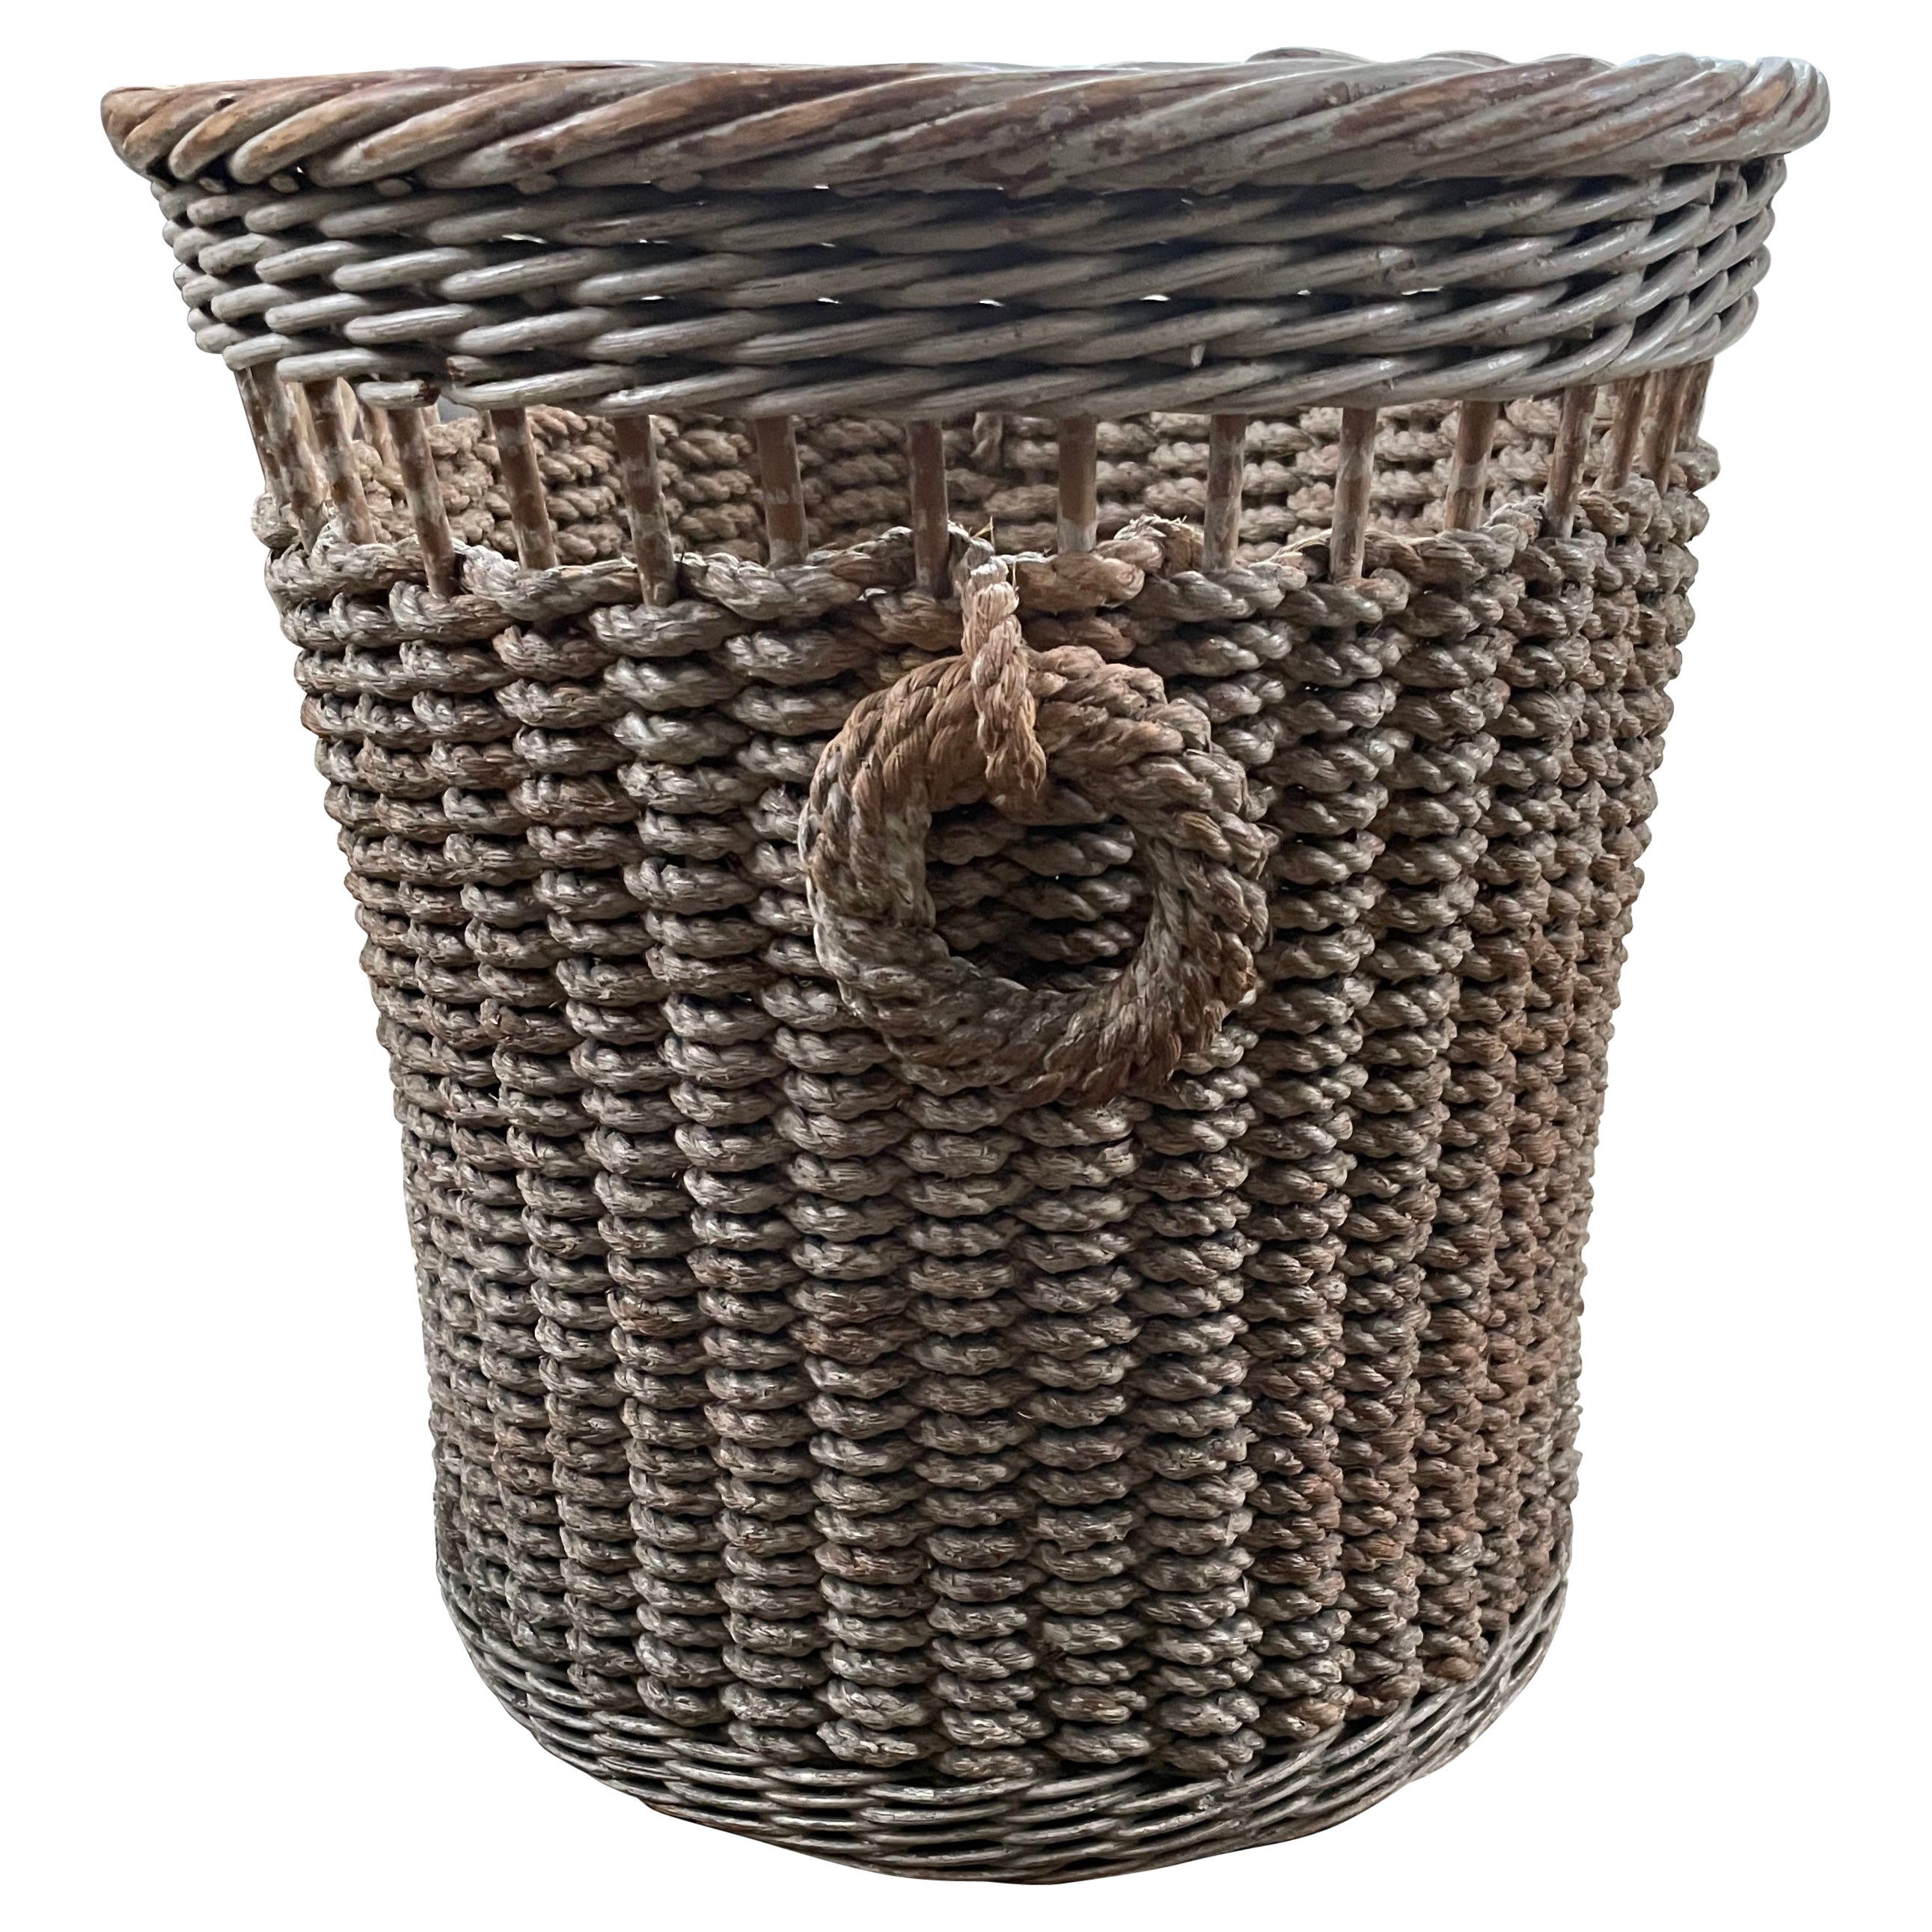 Rope and Wicker Wastebasket